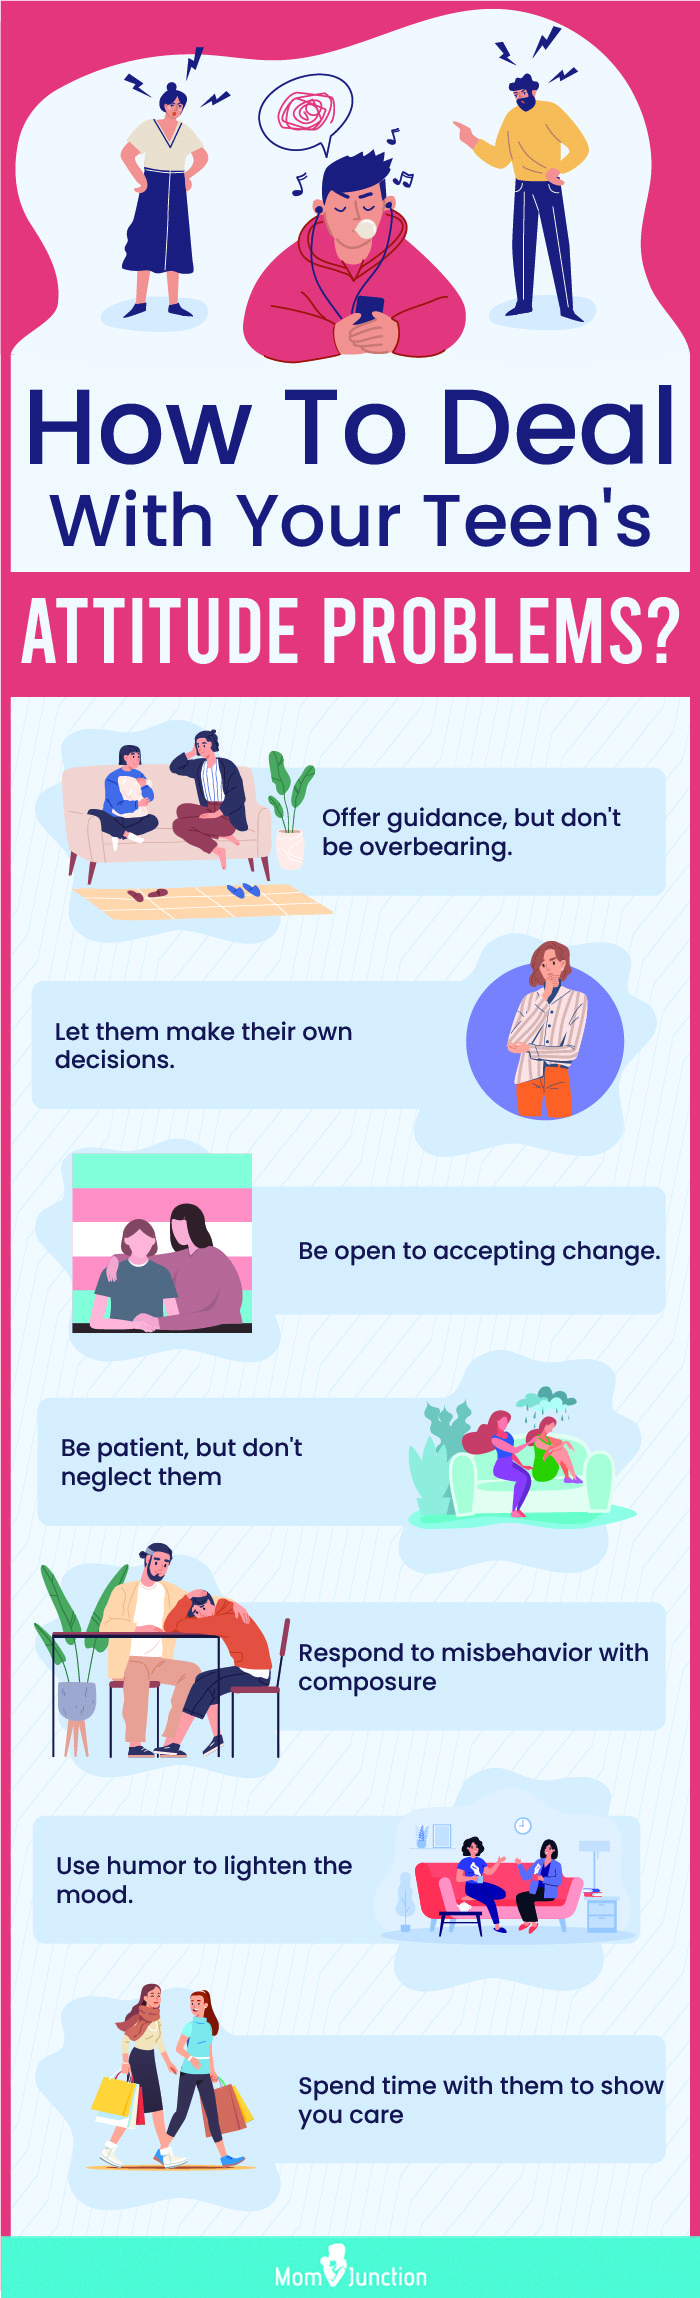 ways to deal with teenage attitude problems (infographic)